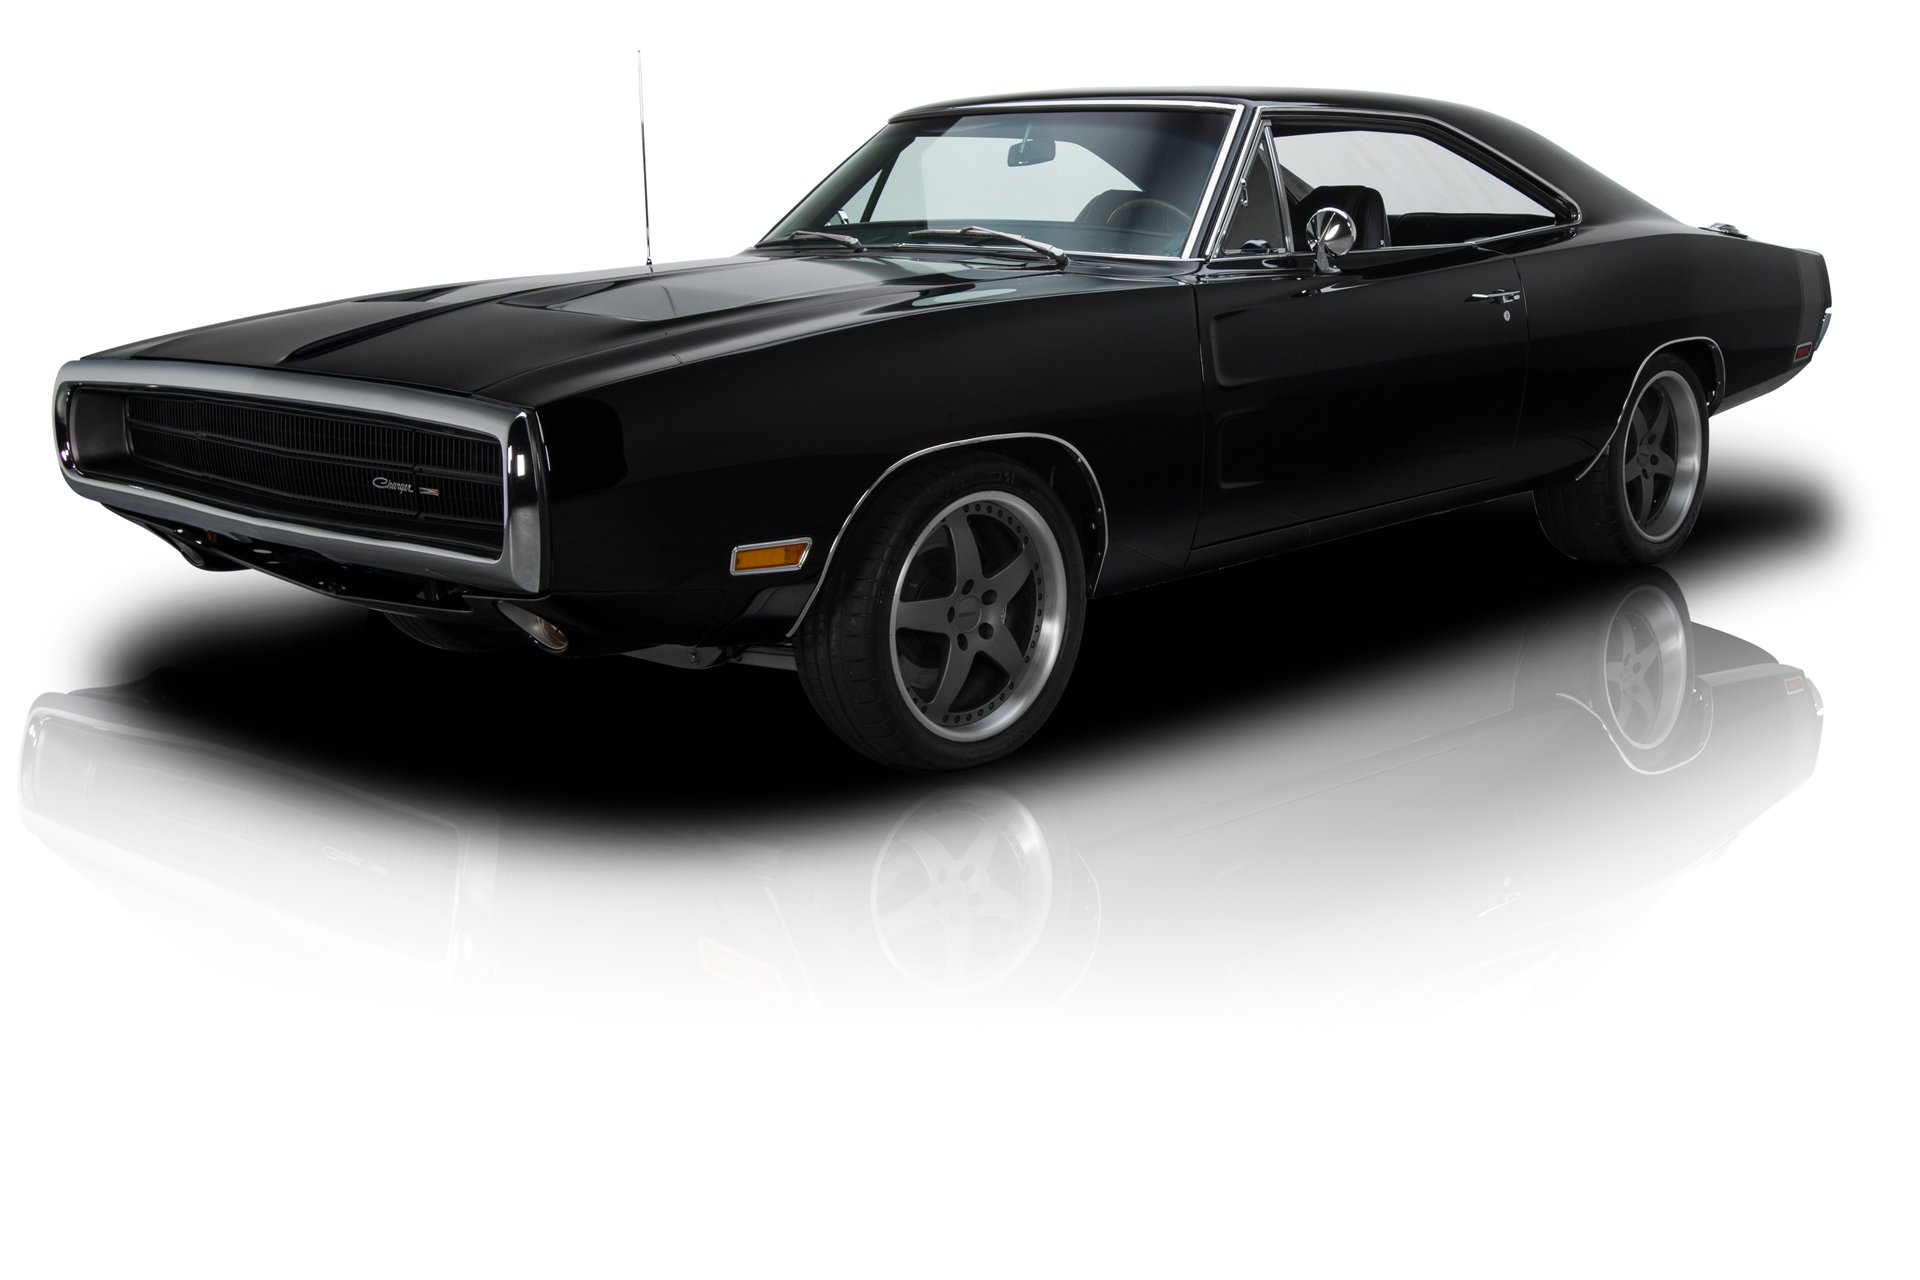 1970 dodge charger 500